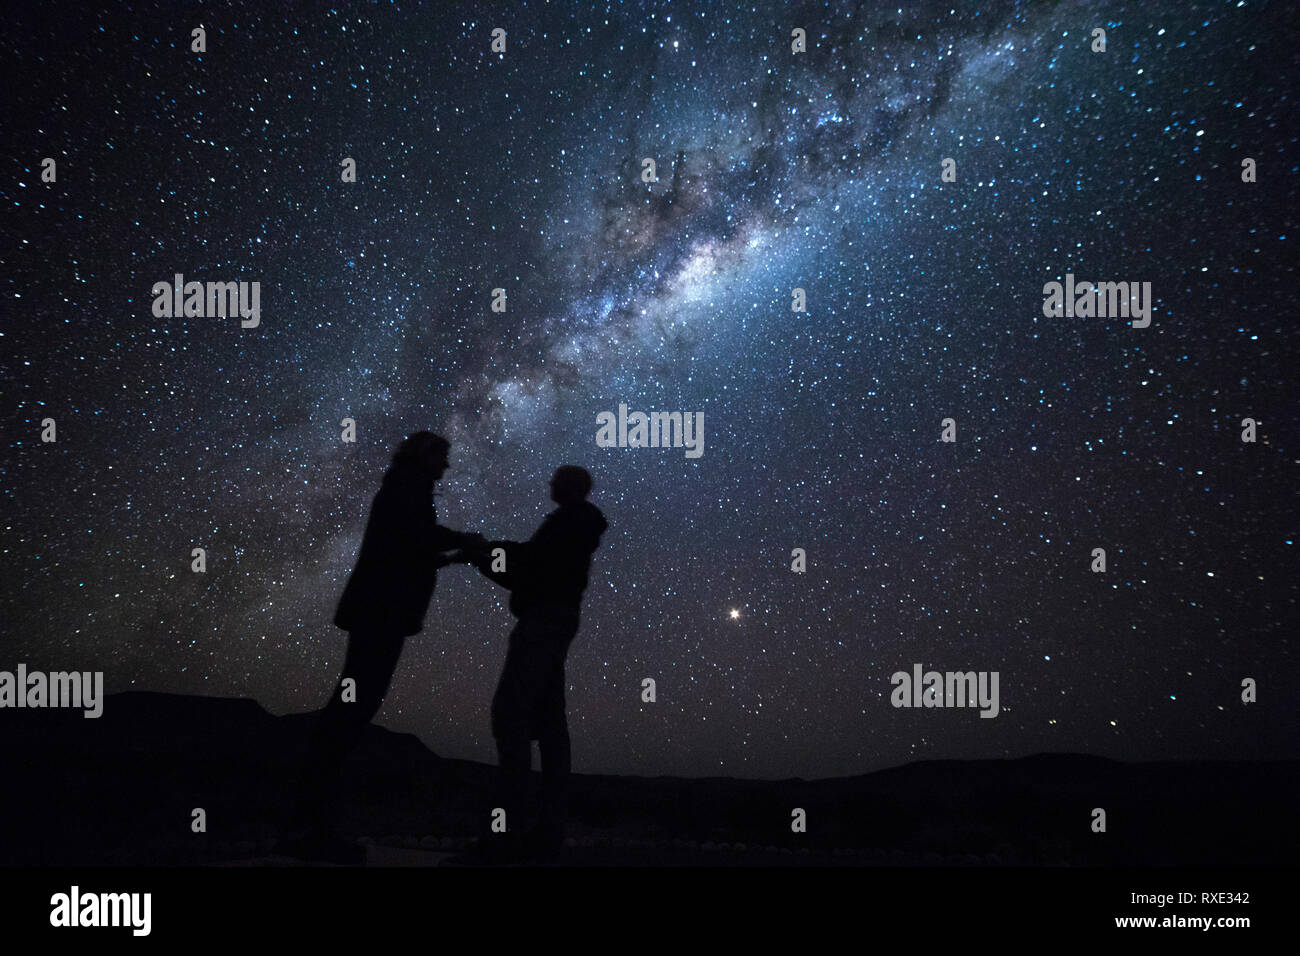 A man proposes to his girlfriend under the stars of the milky way. Stock Photo